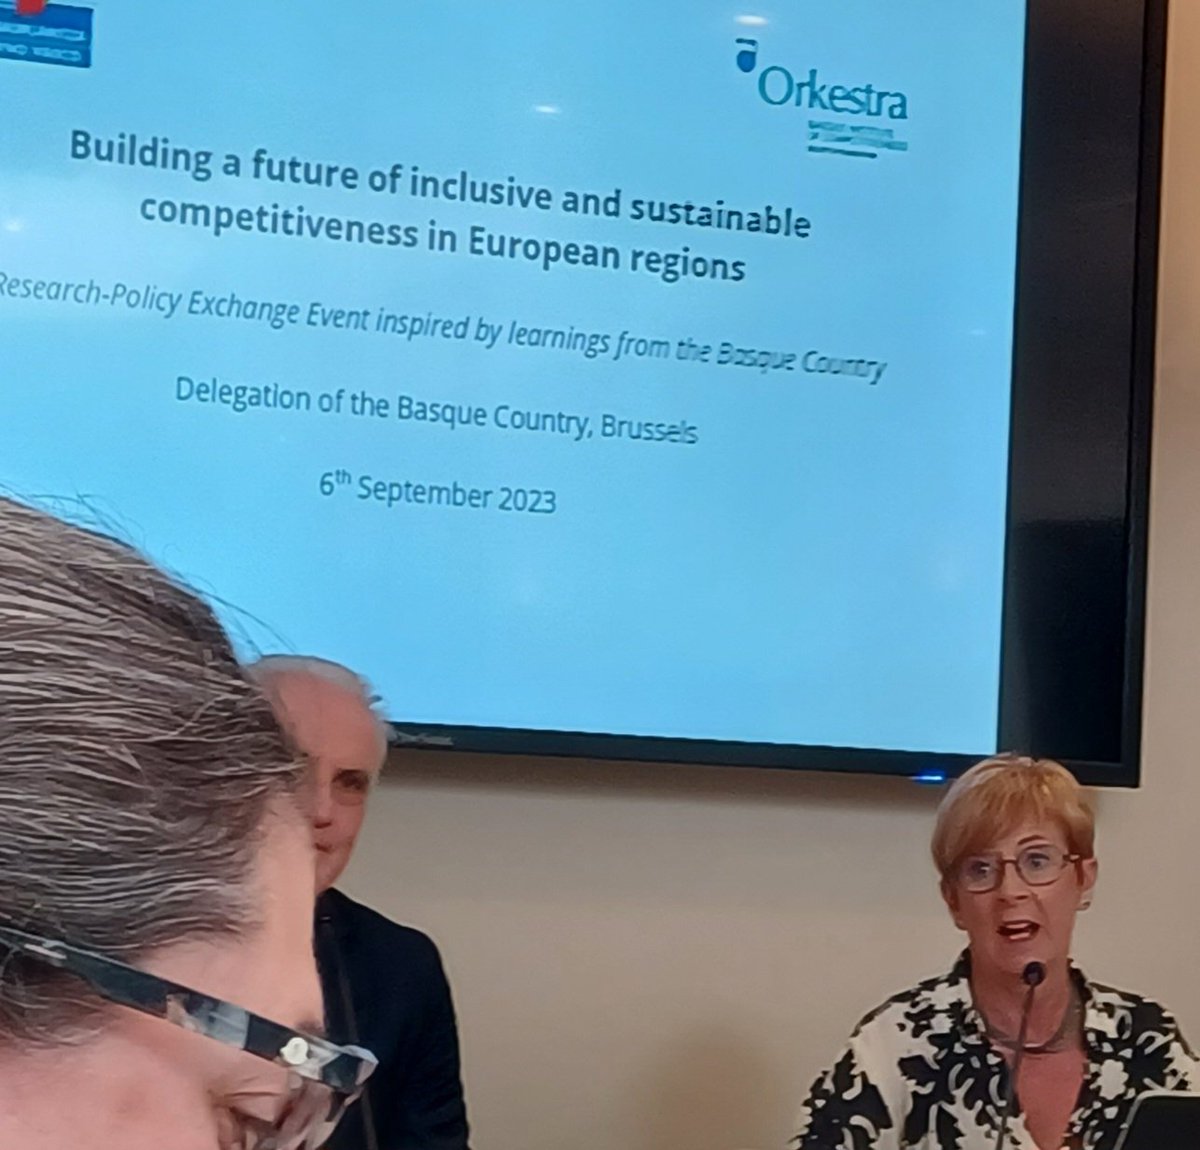 Futures@stake Building a future of #inclusive & #sustainable #competitiveness in #EUregions Interesting discussions organised by @orkestra @jamierwilson Excellent opportunity for @Flanders_DFA to participate